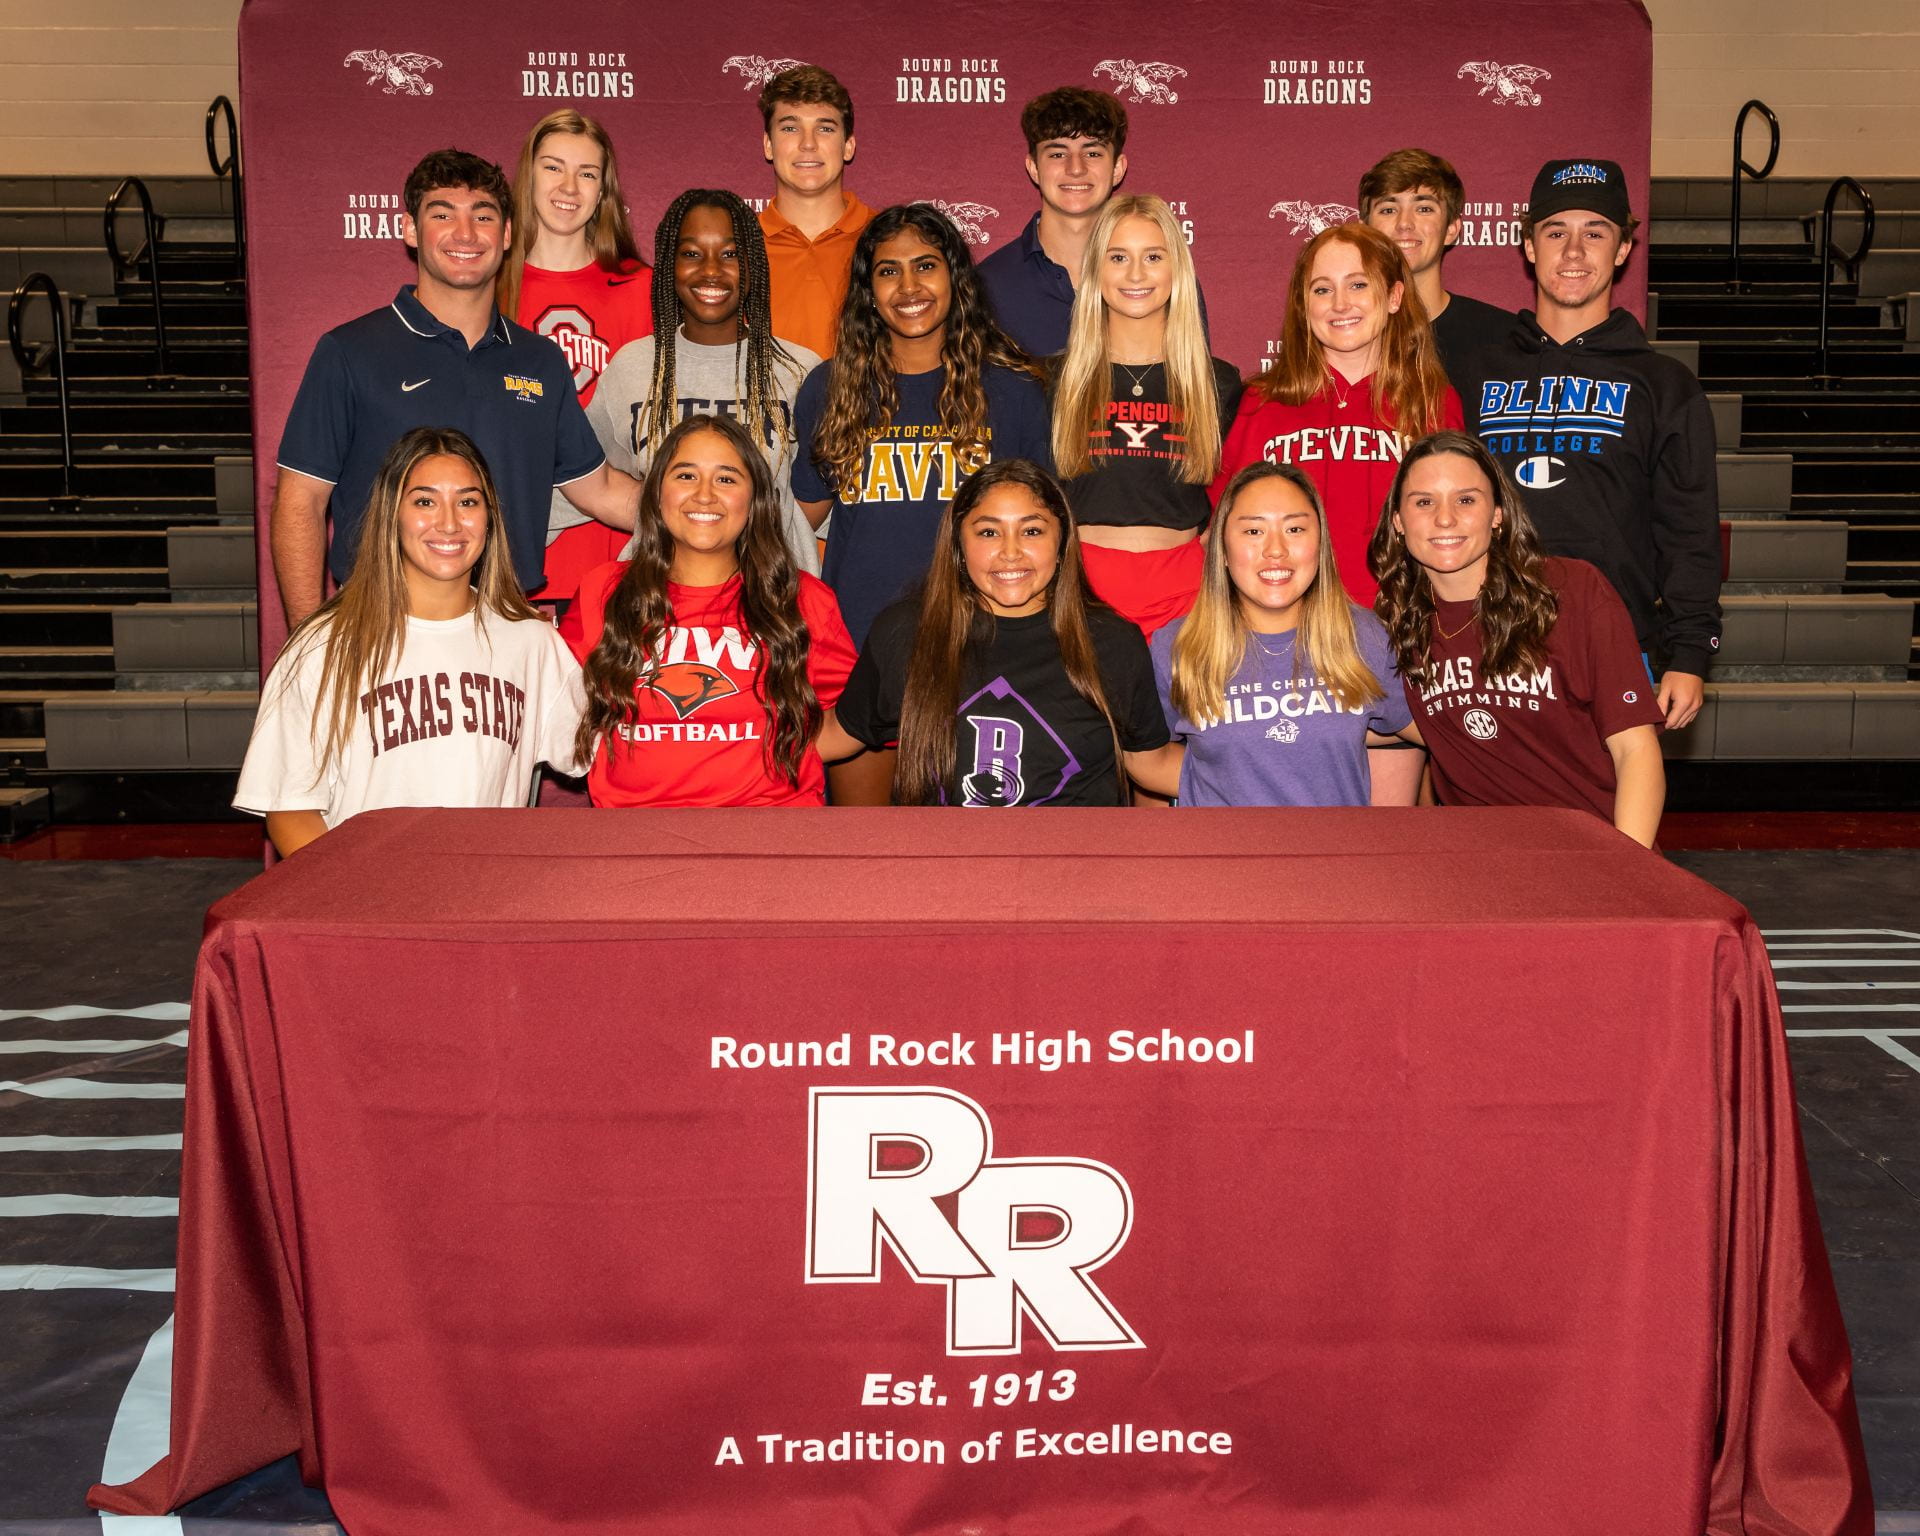 Congratulations to these Student Athletes Round Rock High School